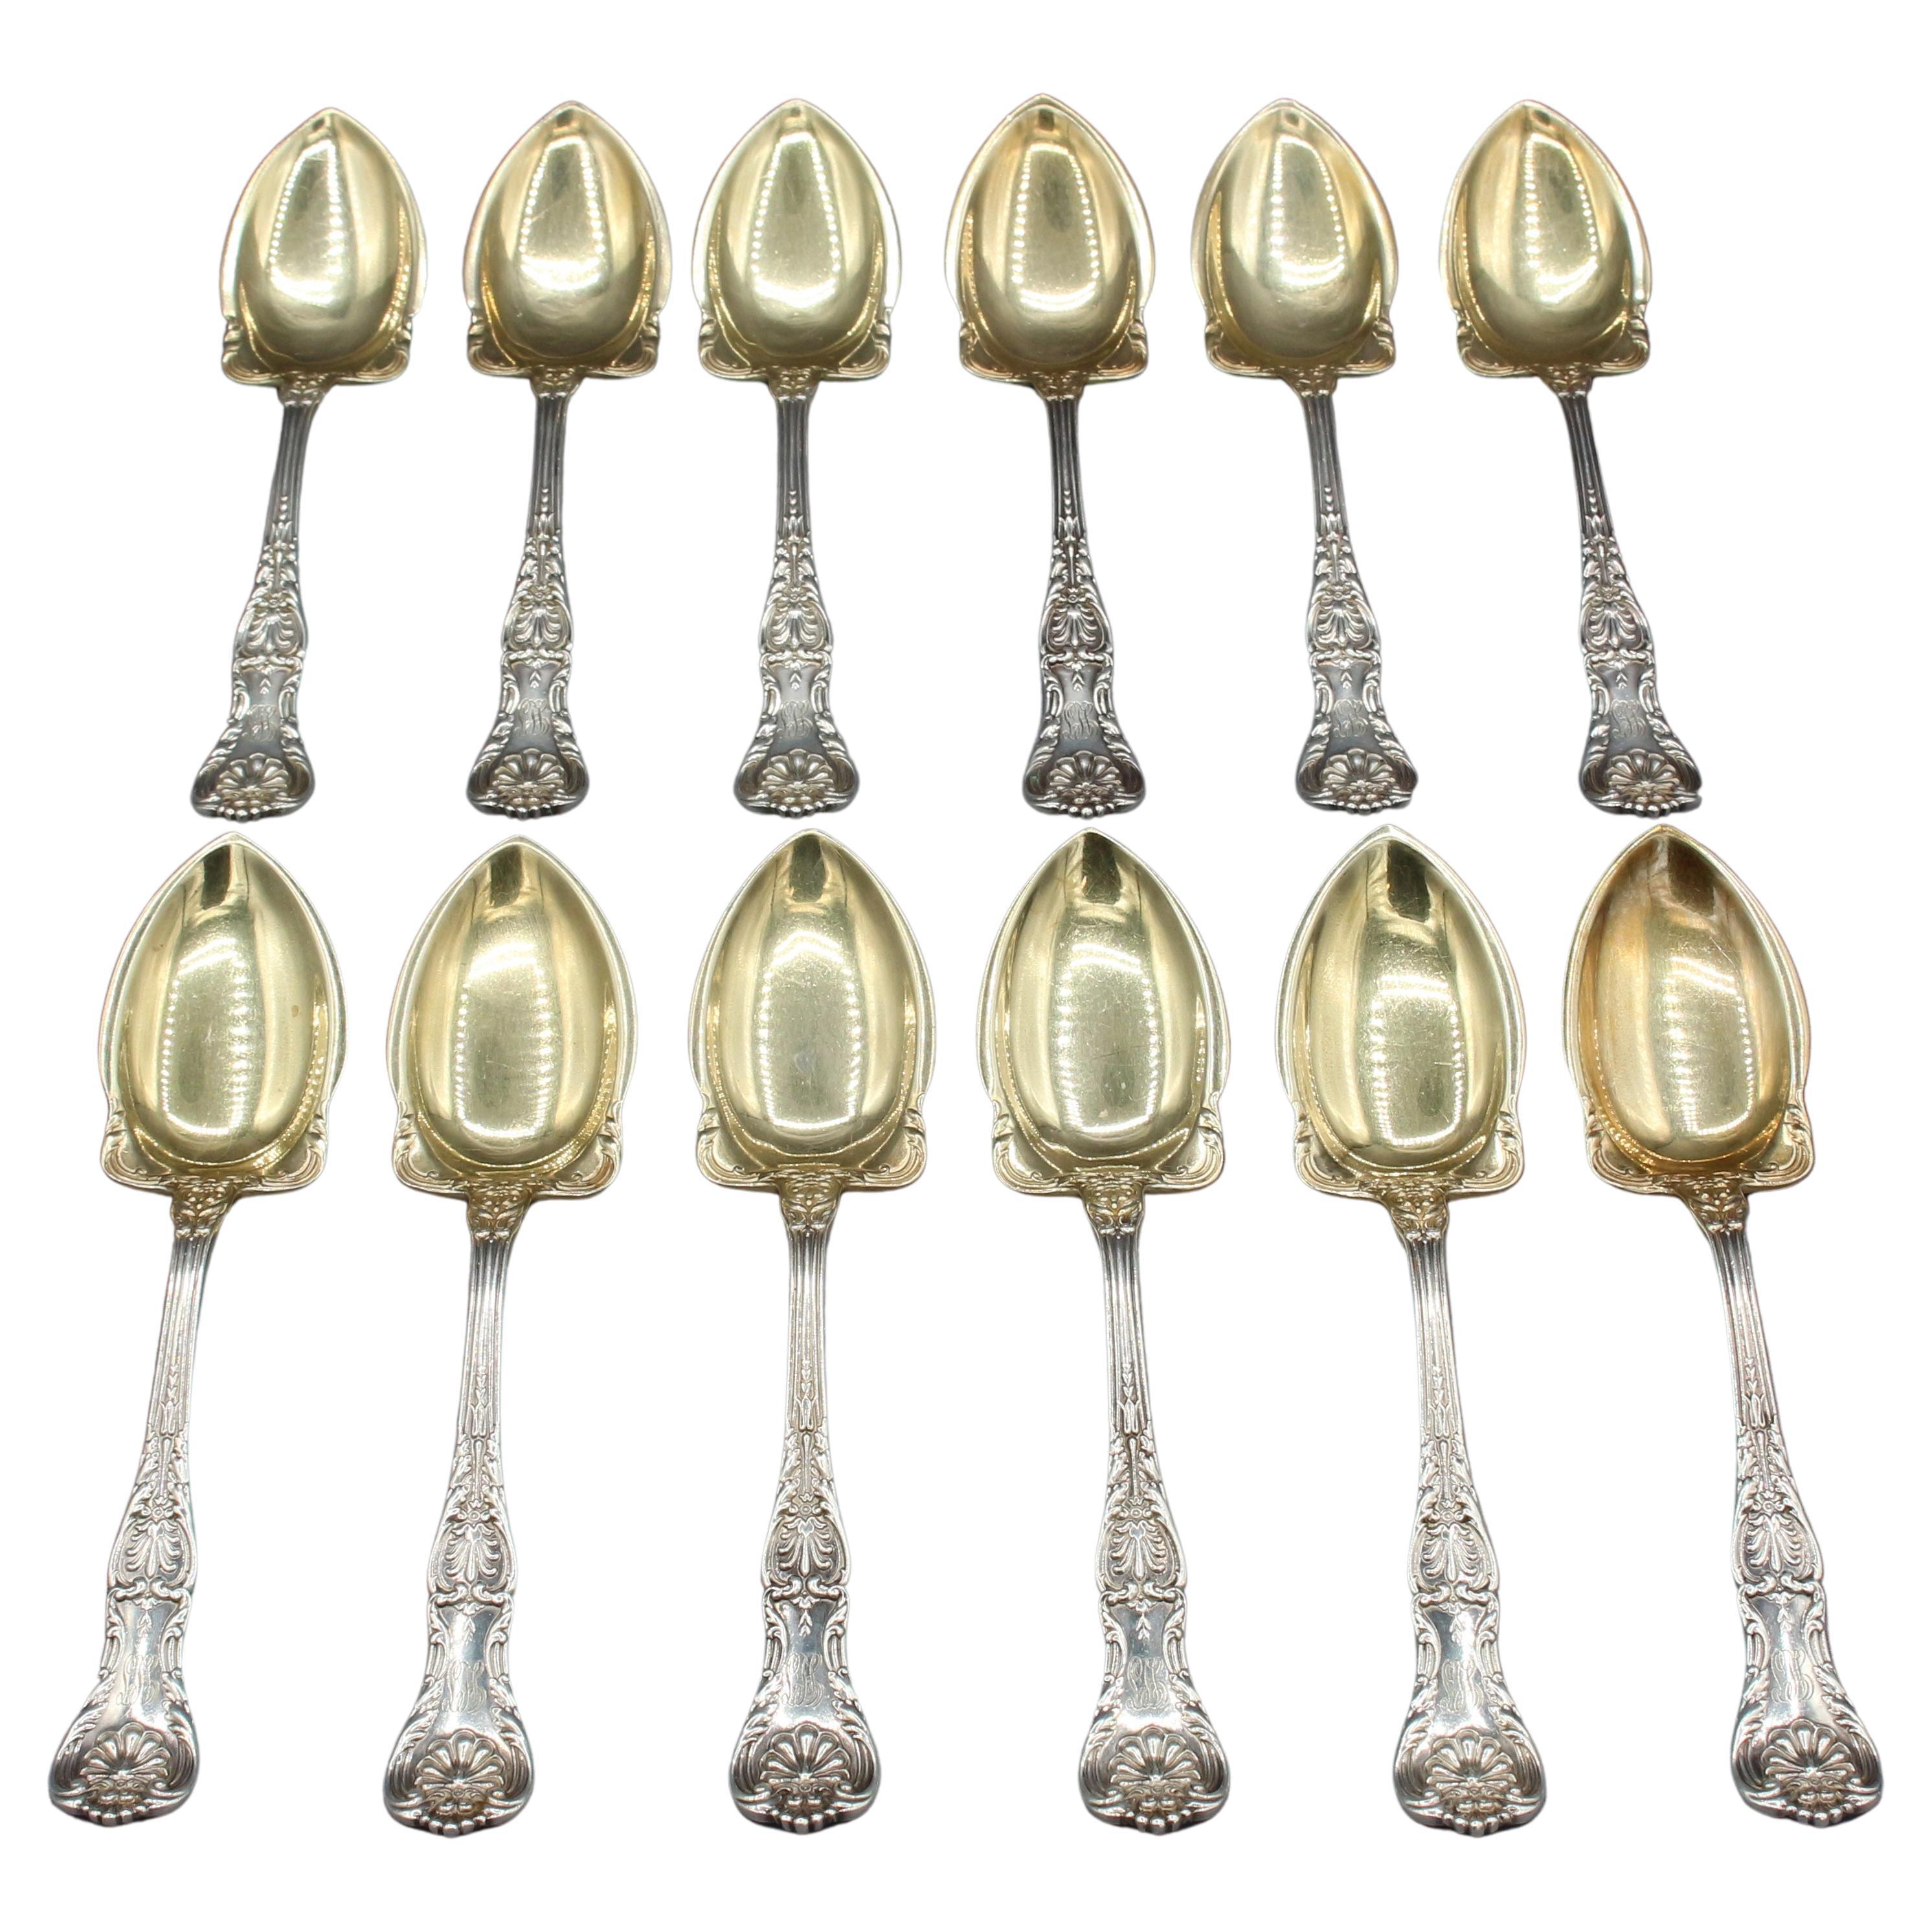 1904 Set of 12 Sterling Silver Fruit Spoons in "King George" by Gorham For Sale